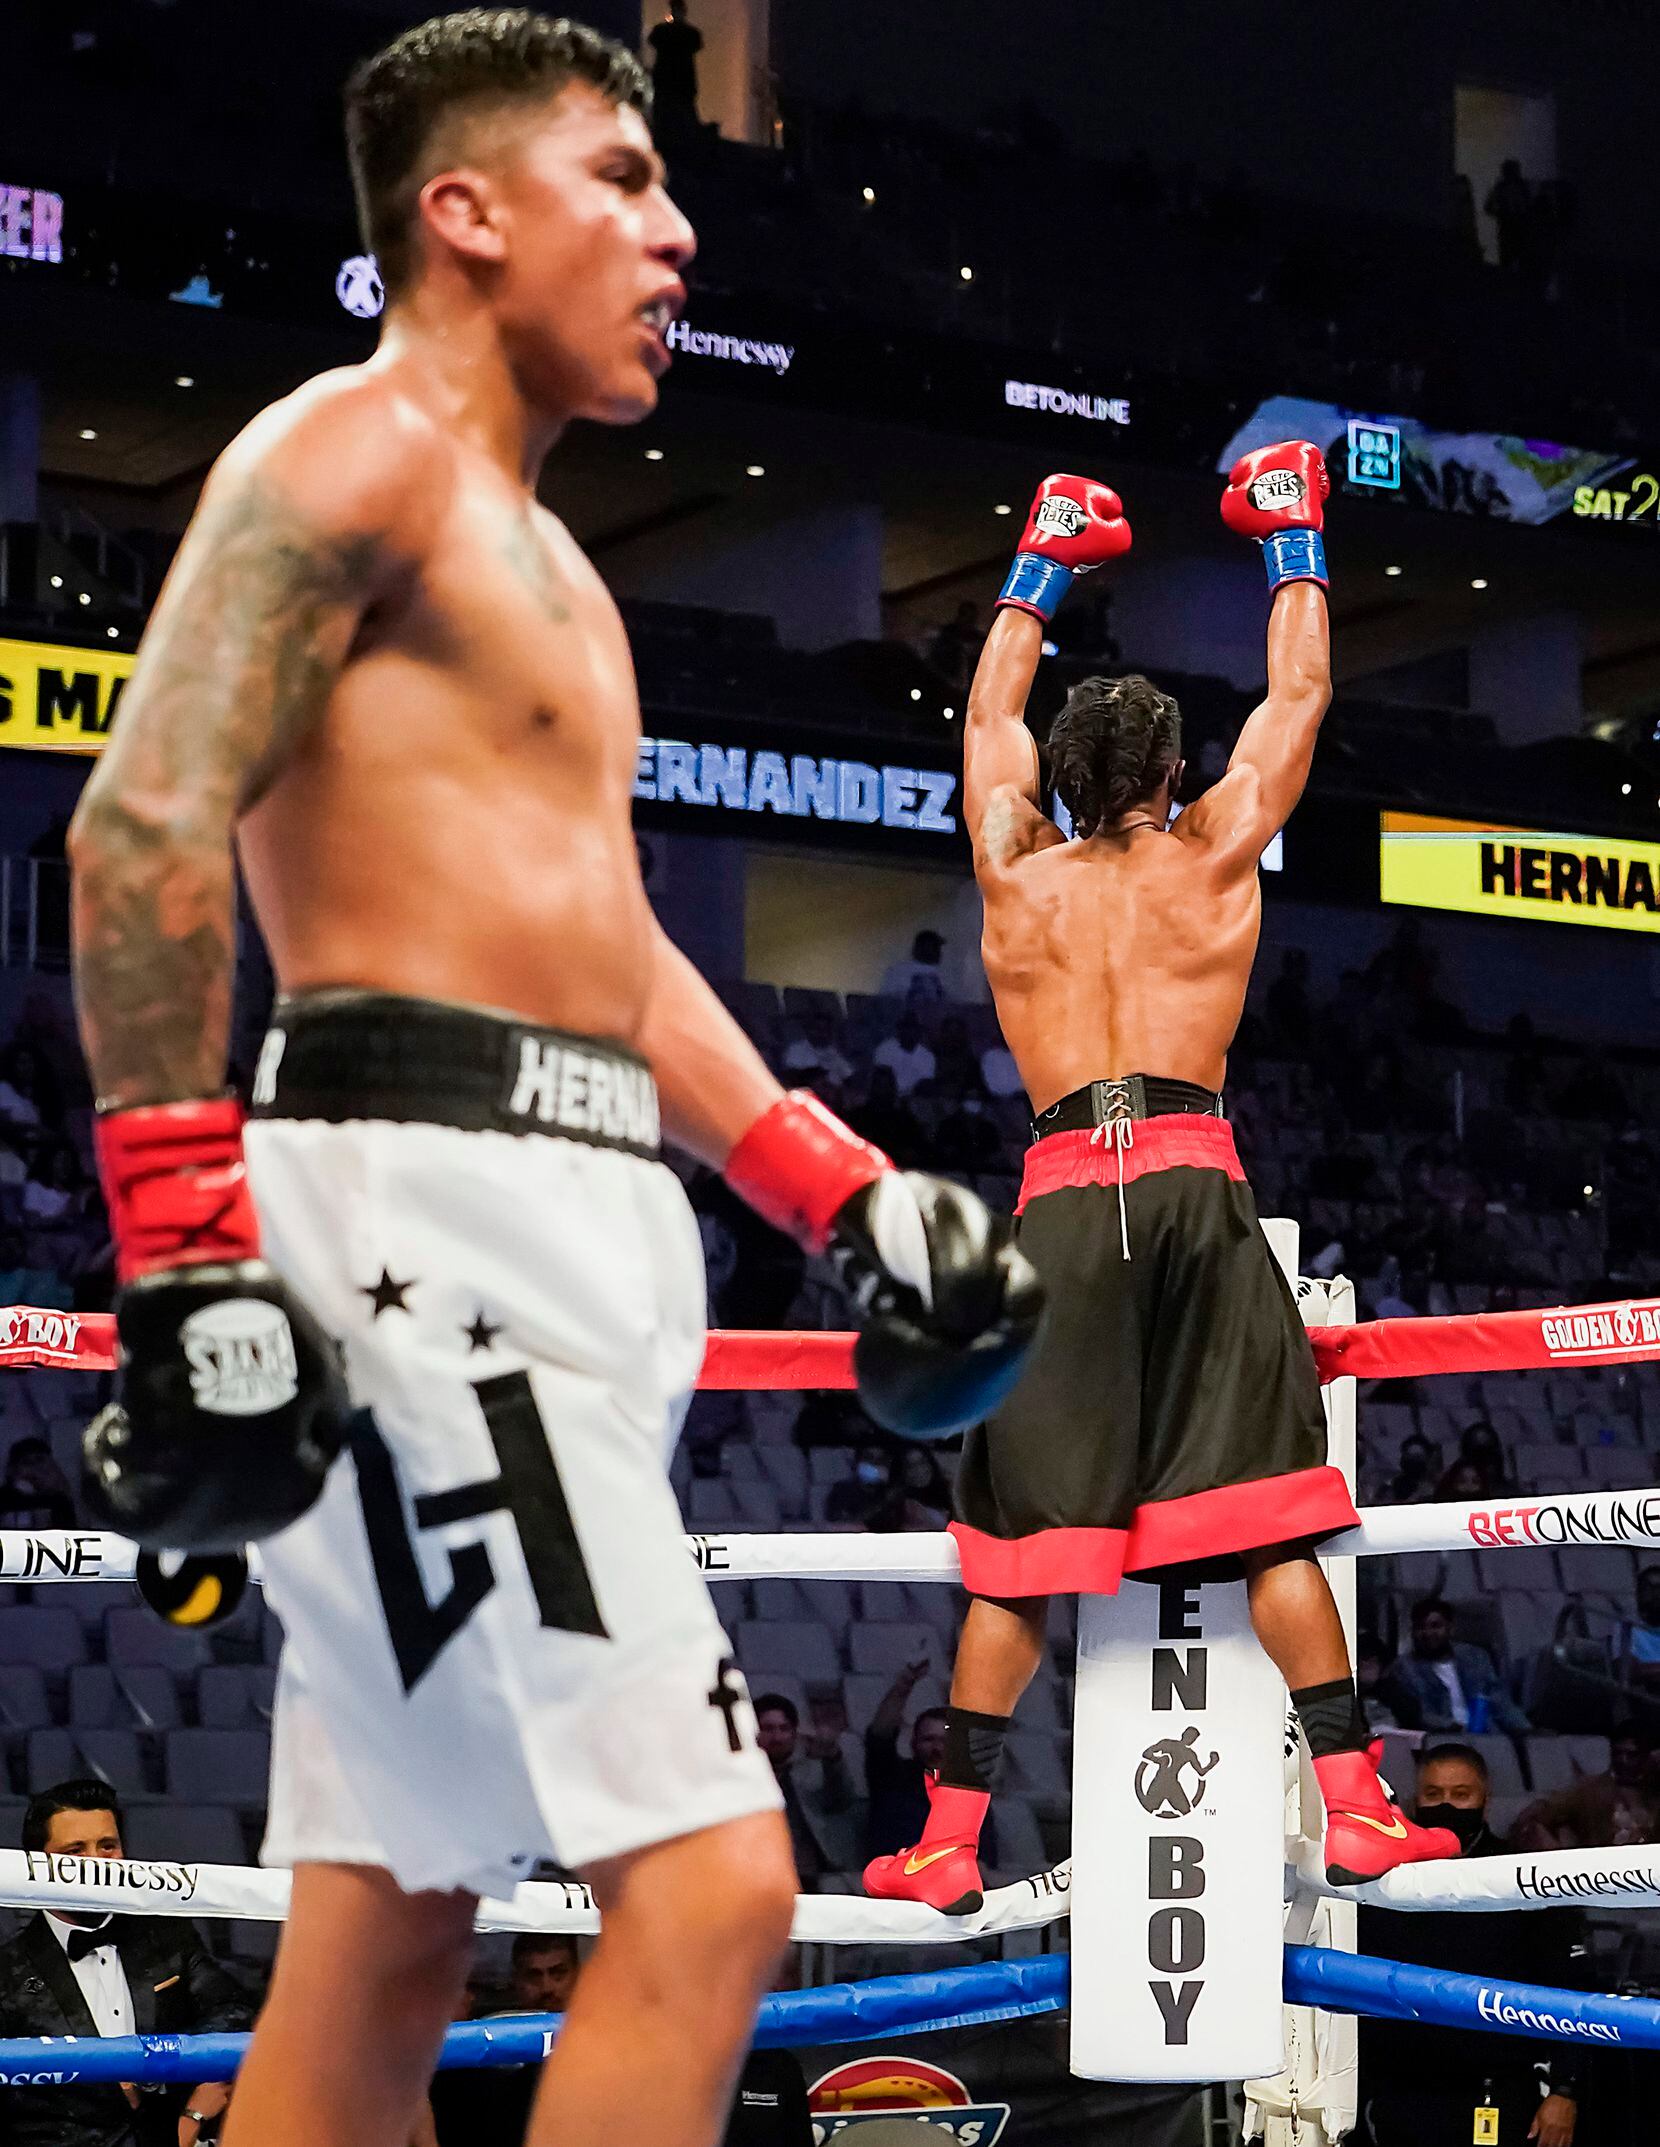 Alex Martin celebrates after defeating Luis Hernandez in a super lightweight bout at Dickies Arena on Saturday, March 20, 2021, in Fort Worth.